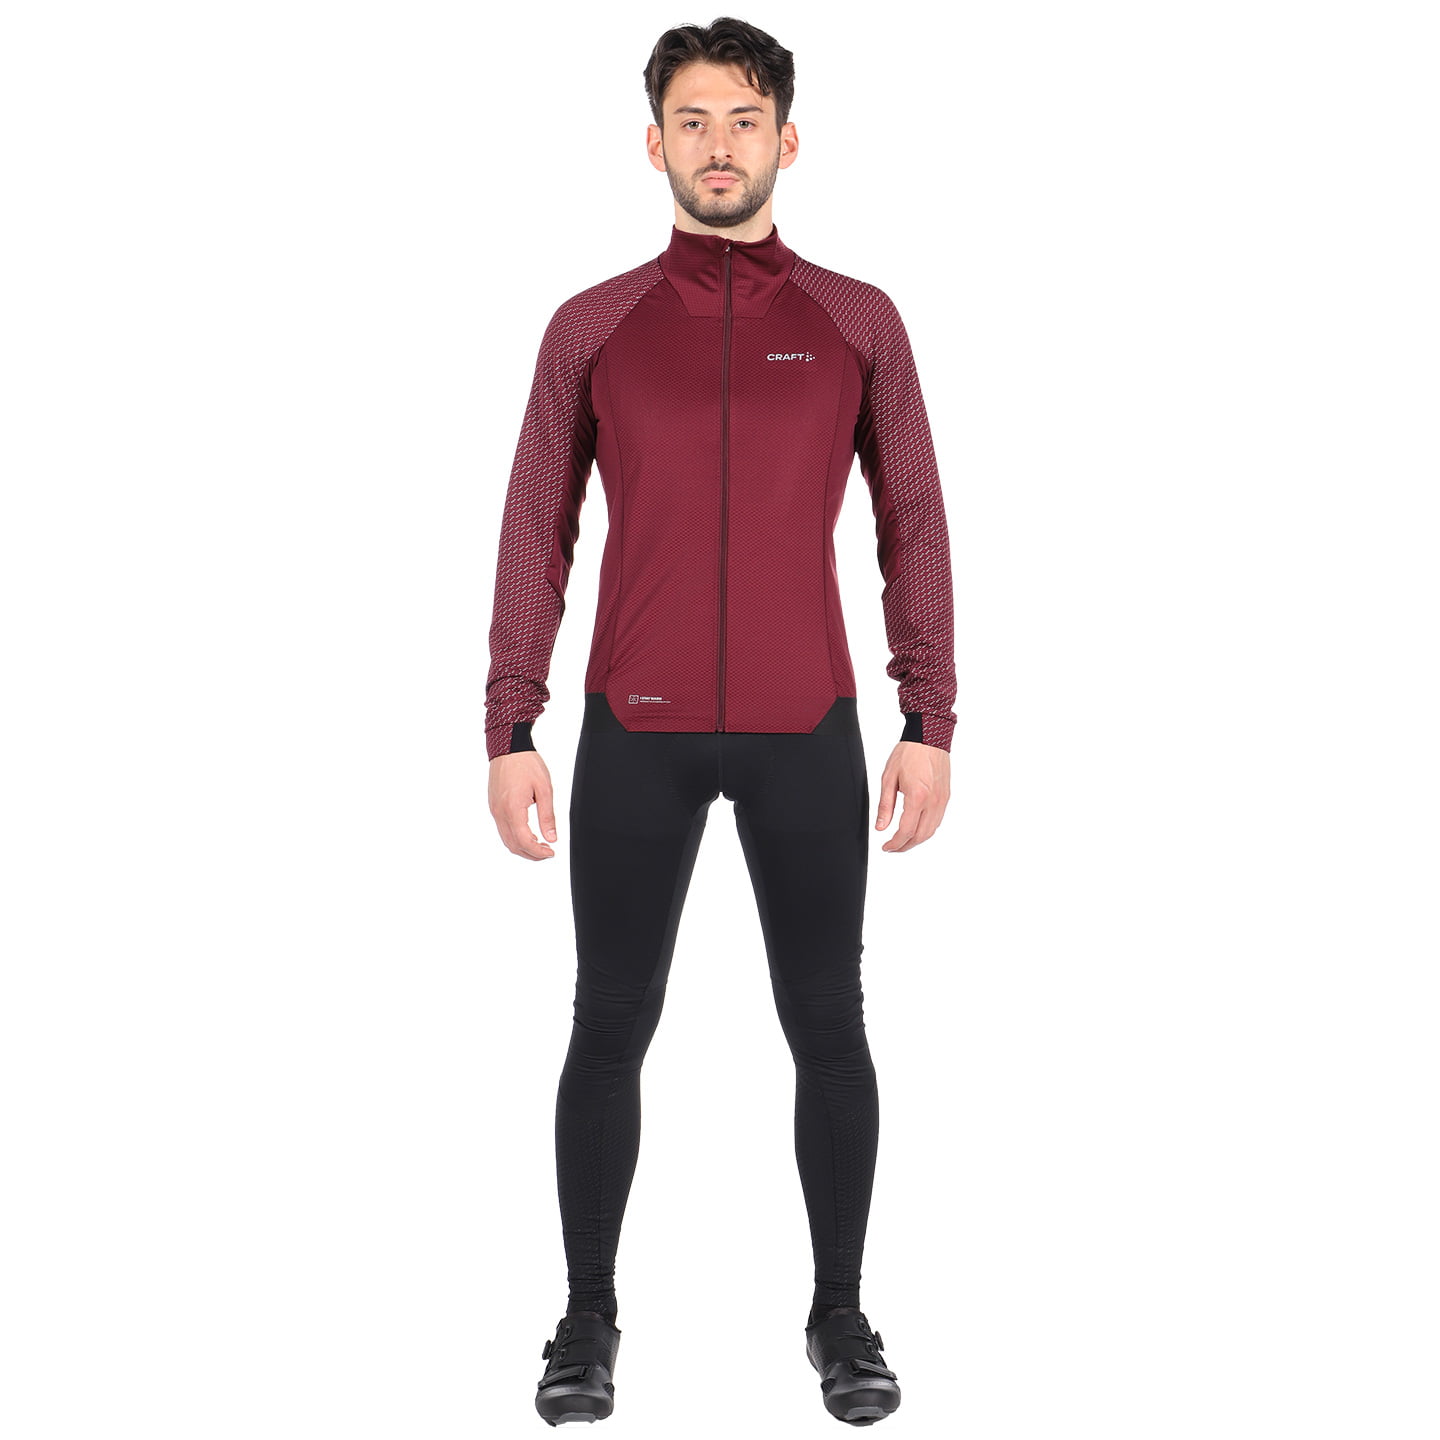 CRAFT Adv SubZ Lumen Set (winter jacket + cycling tights) Set (2 pieces), for men